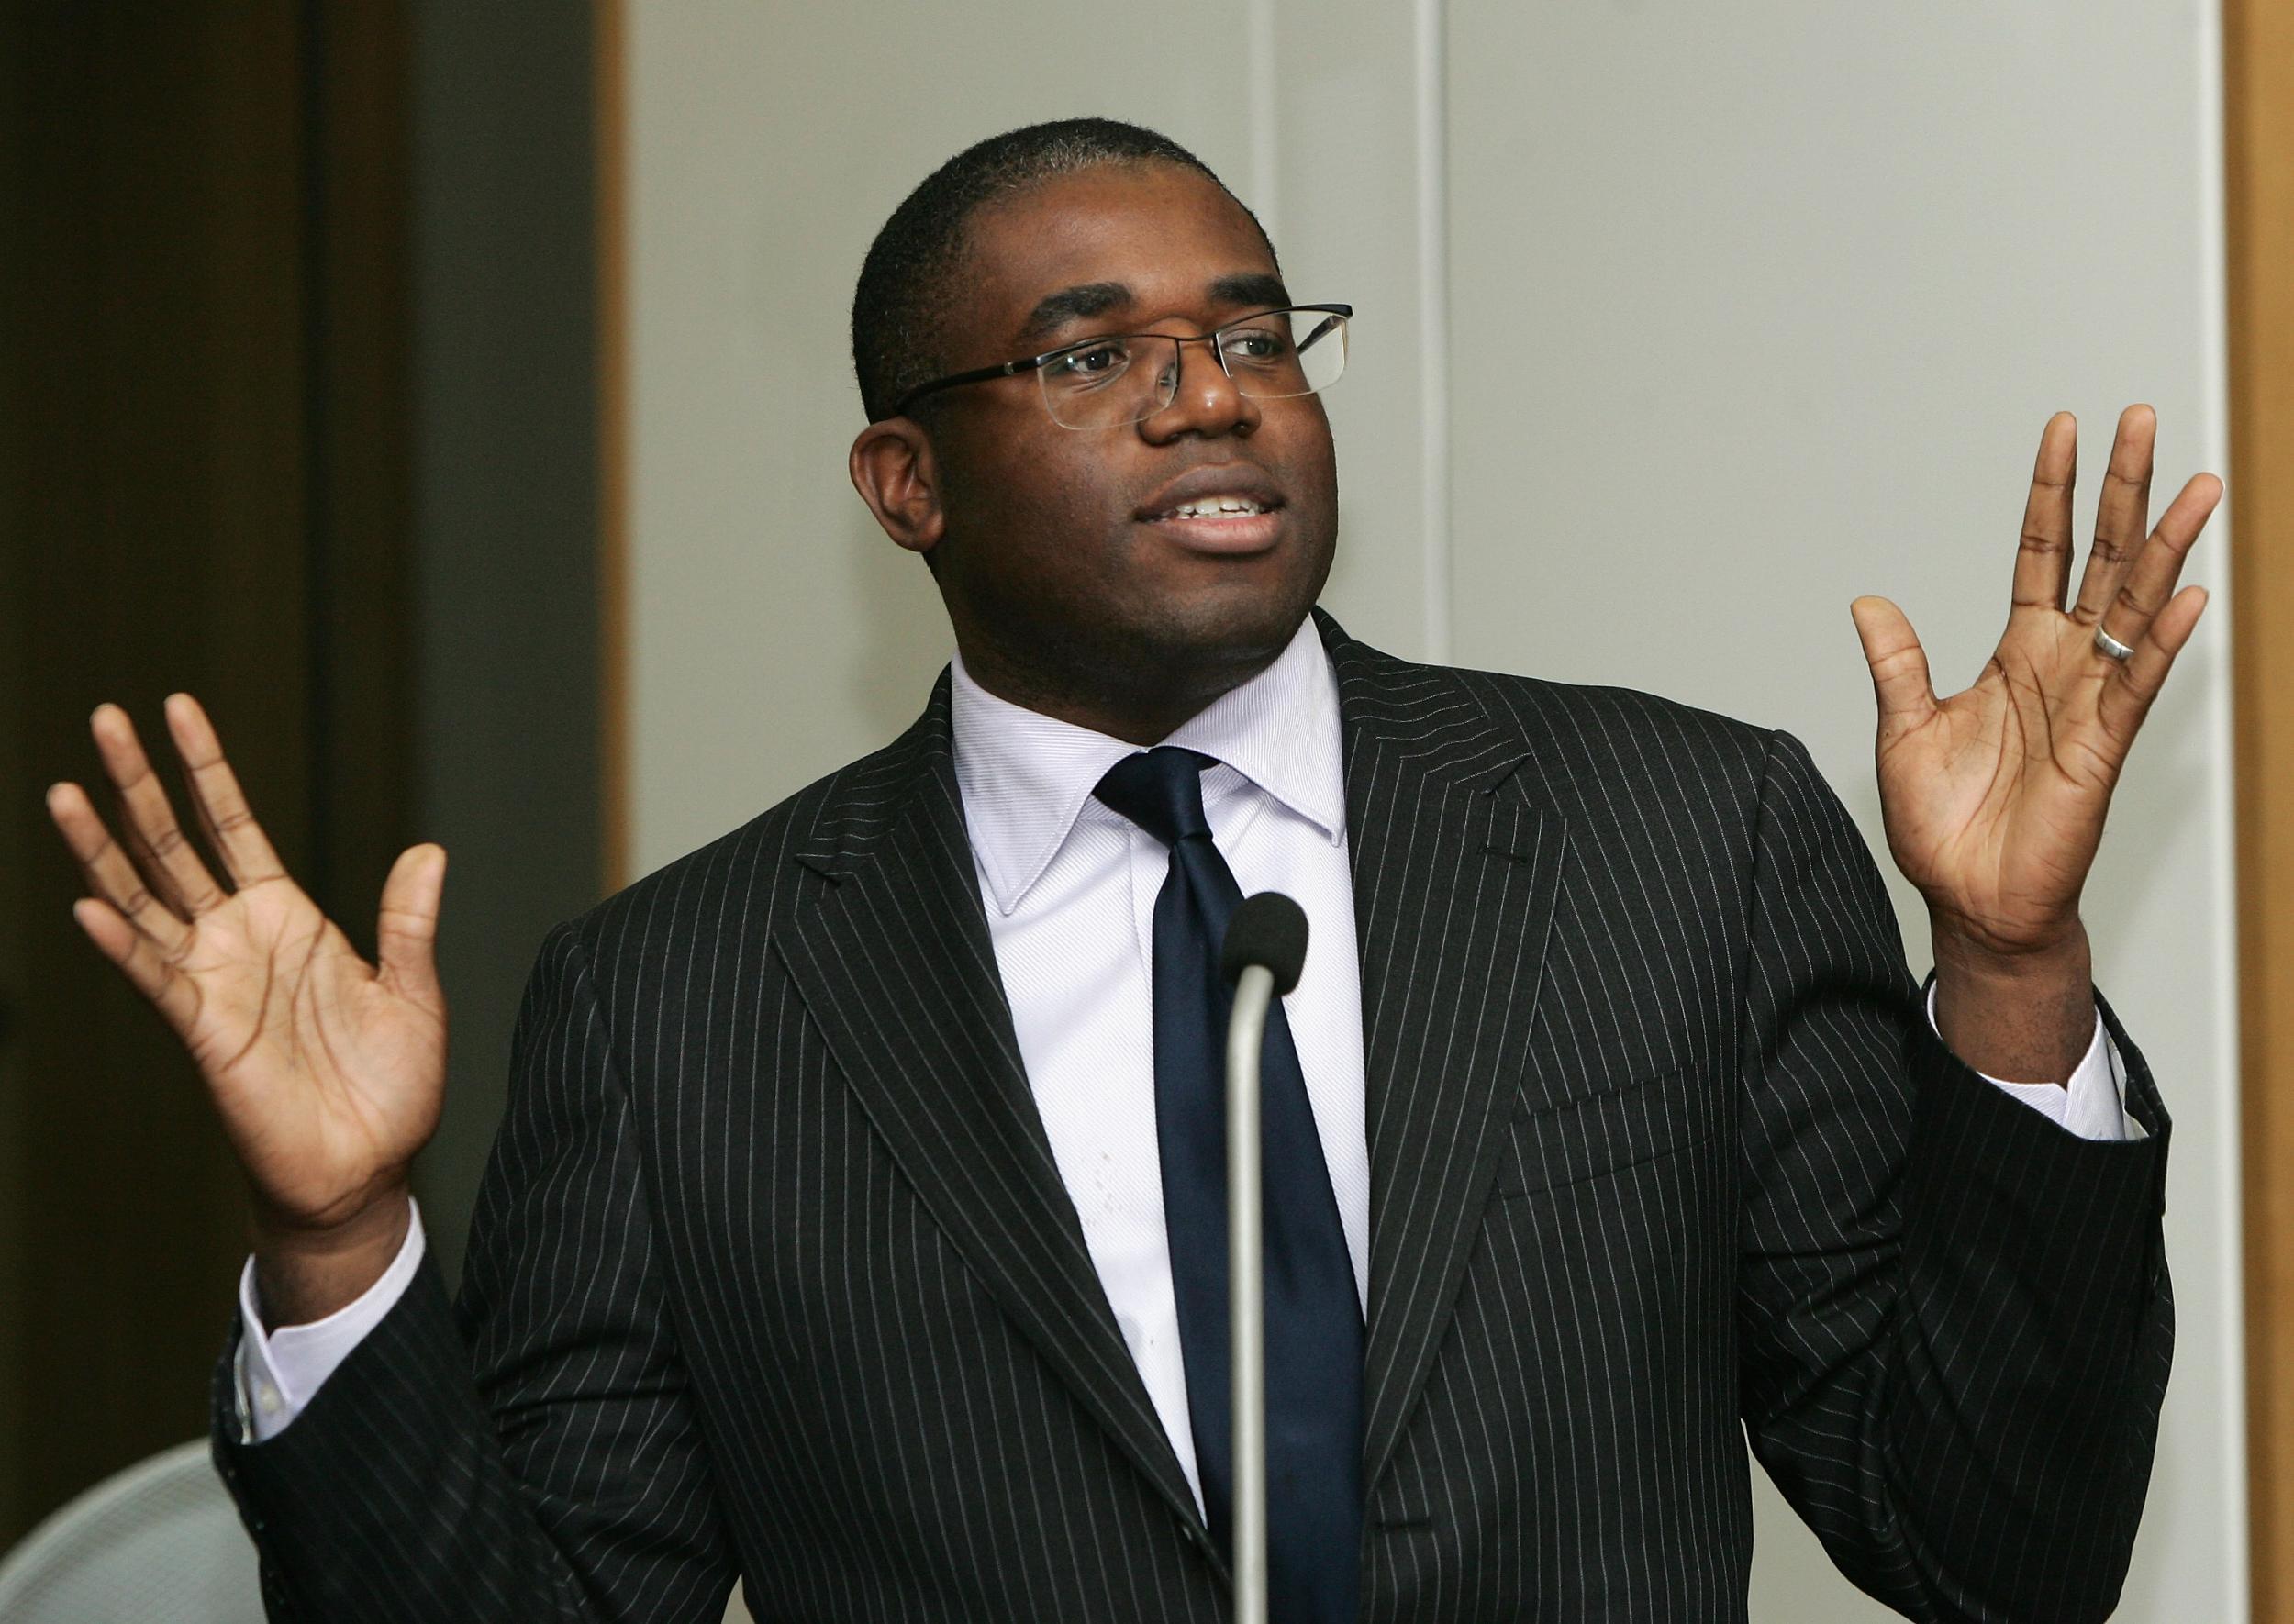 David Lammy's report is right to address the discrimination against BAME people in the criminal justice system